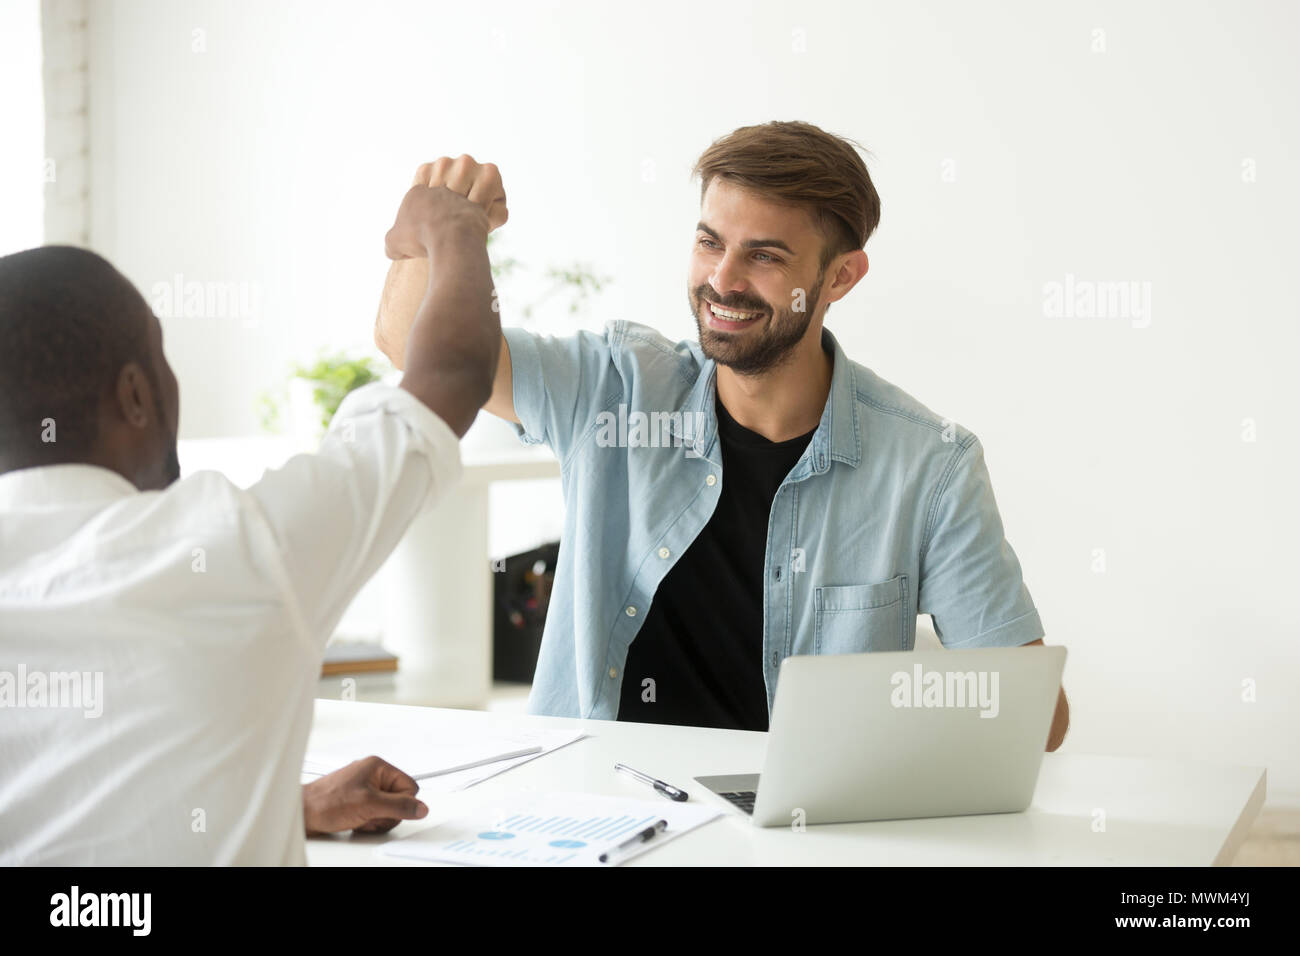 Colleagues giving fist bumps after reaching shared business goal Stock Photo